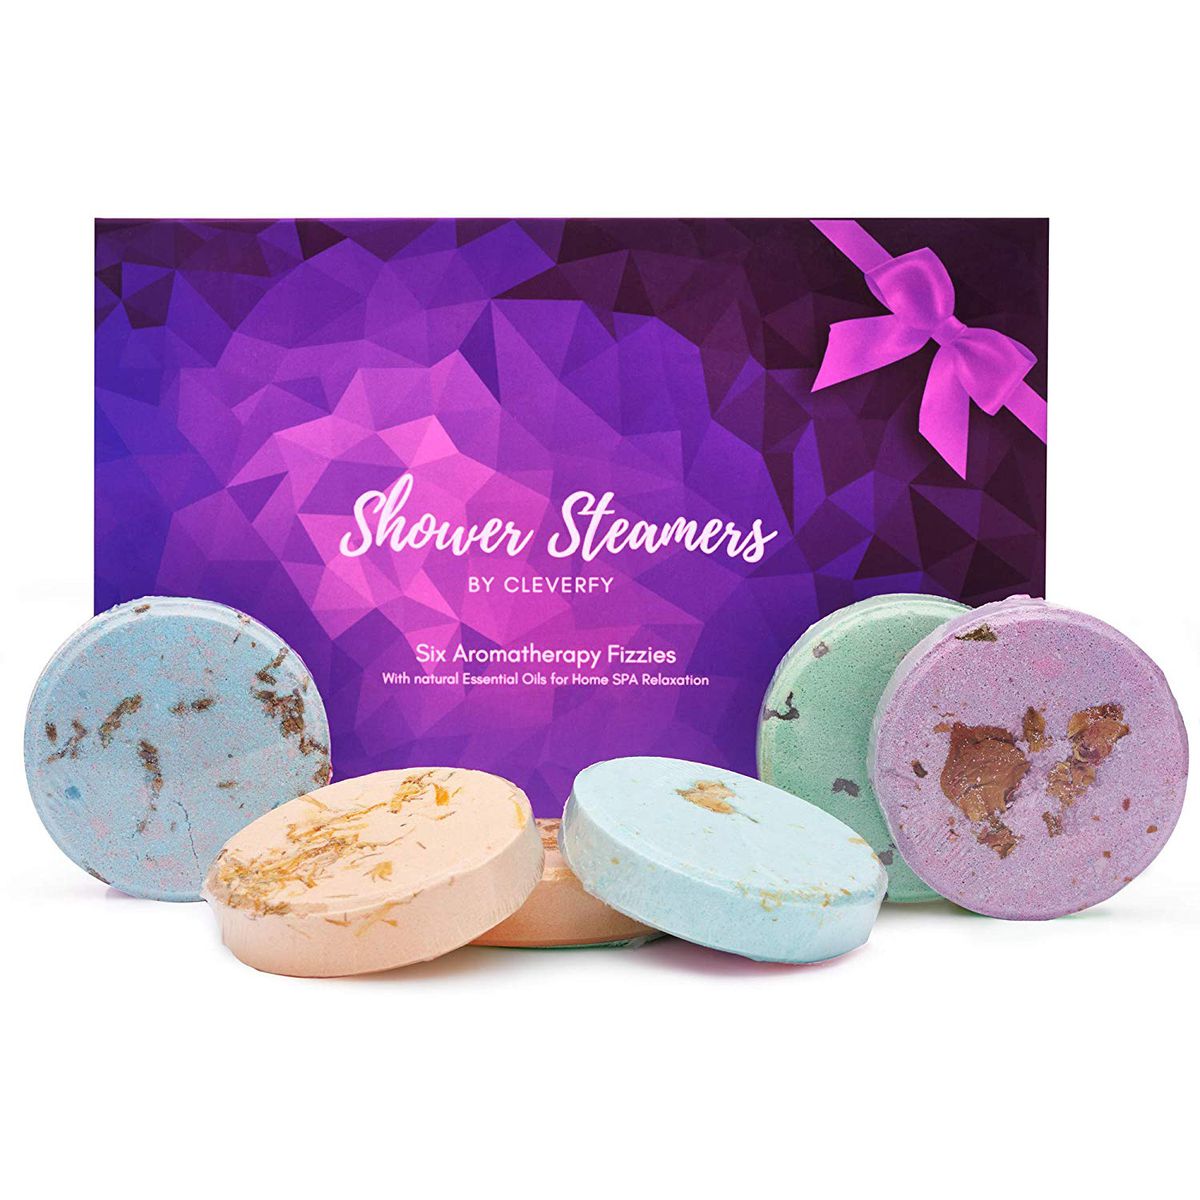 Cleverfy Shower Steamers Mothers Day Gifts